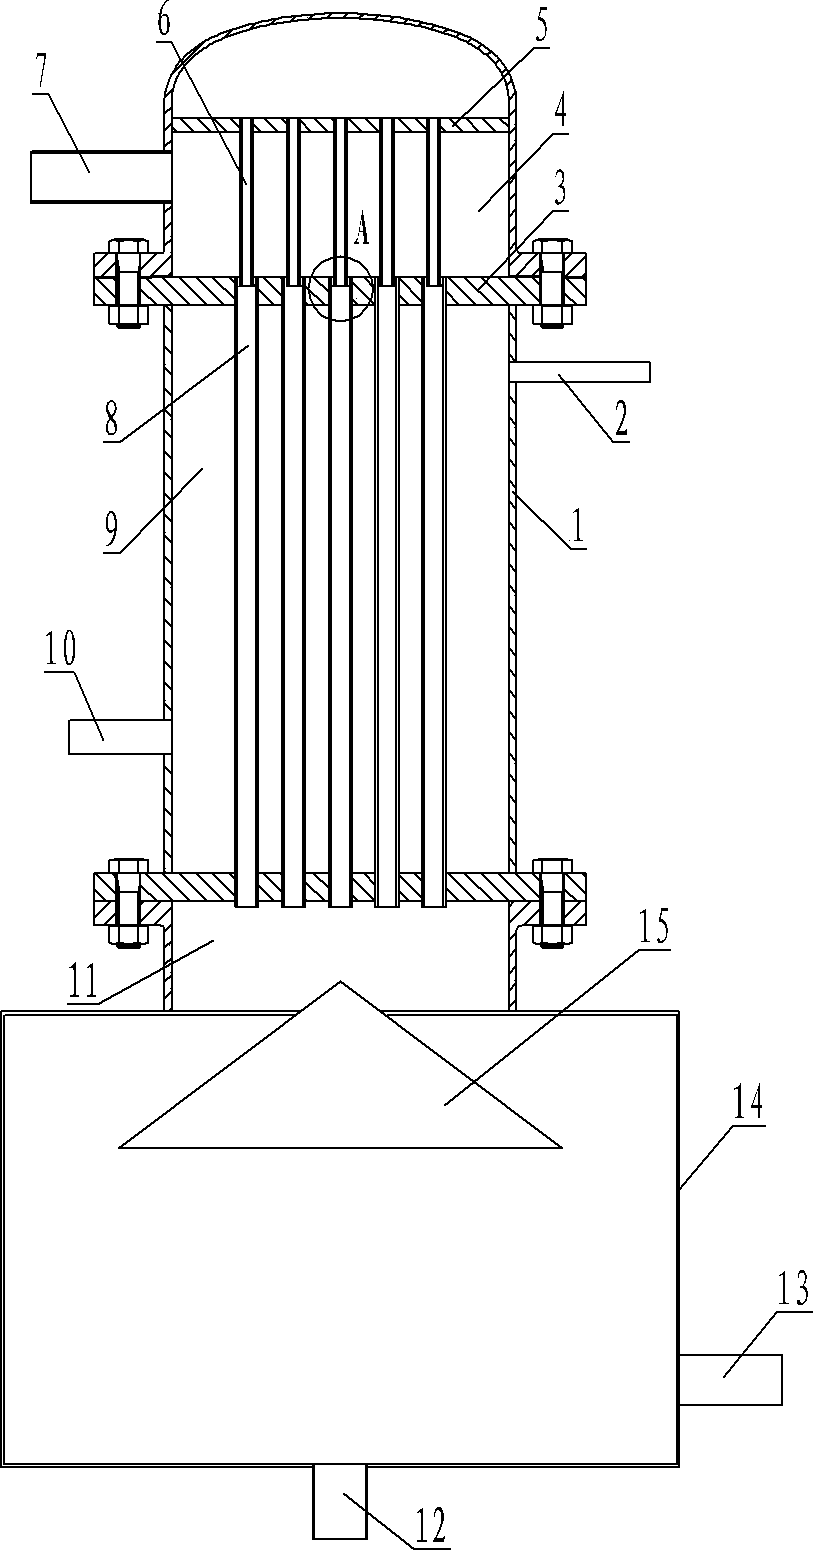 Device for dynamically preparing ice slurry